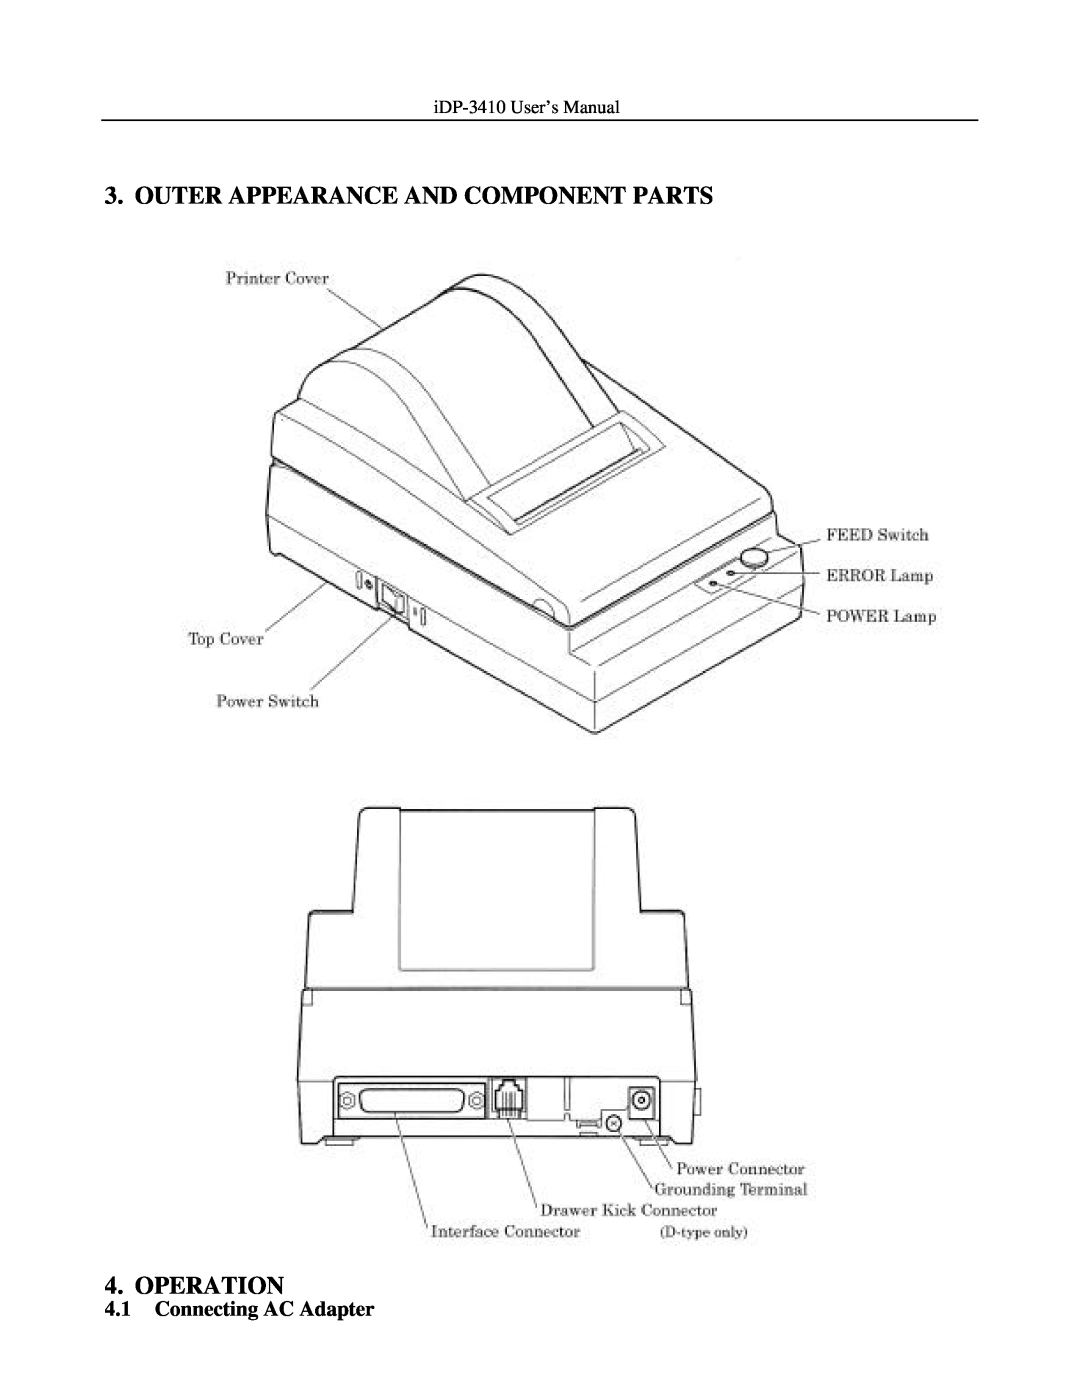 Addlogix iDP-3410 user manual OUTER APPEARANCE AND COMPONENT PARTS 4. OPERATION, Connecting AC Adapter 